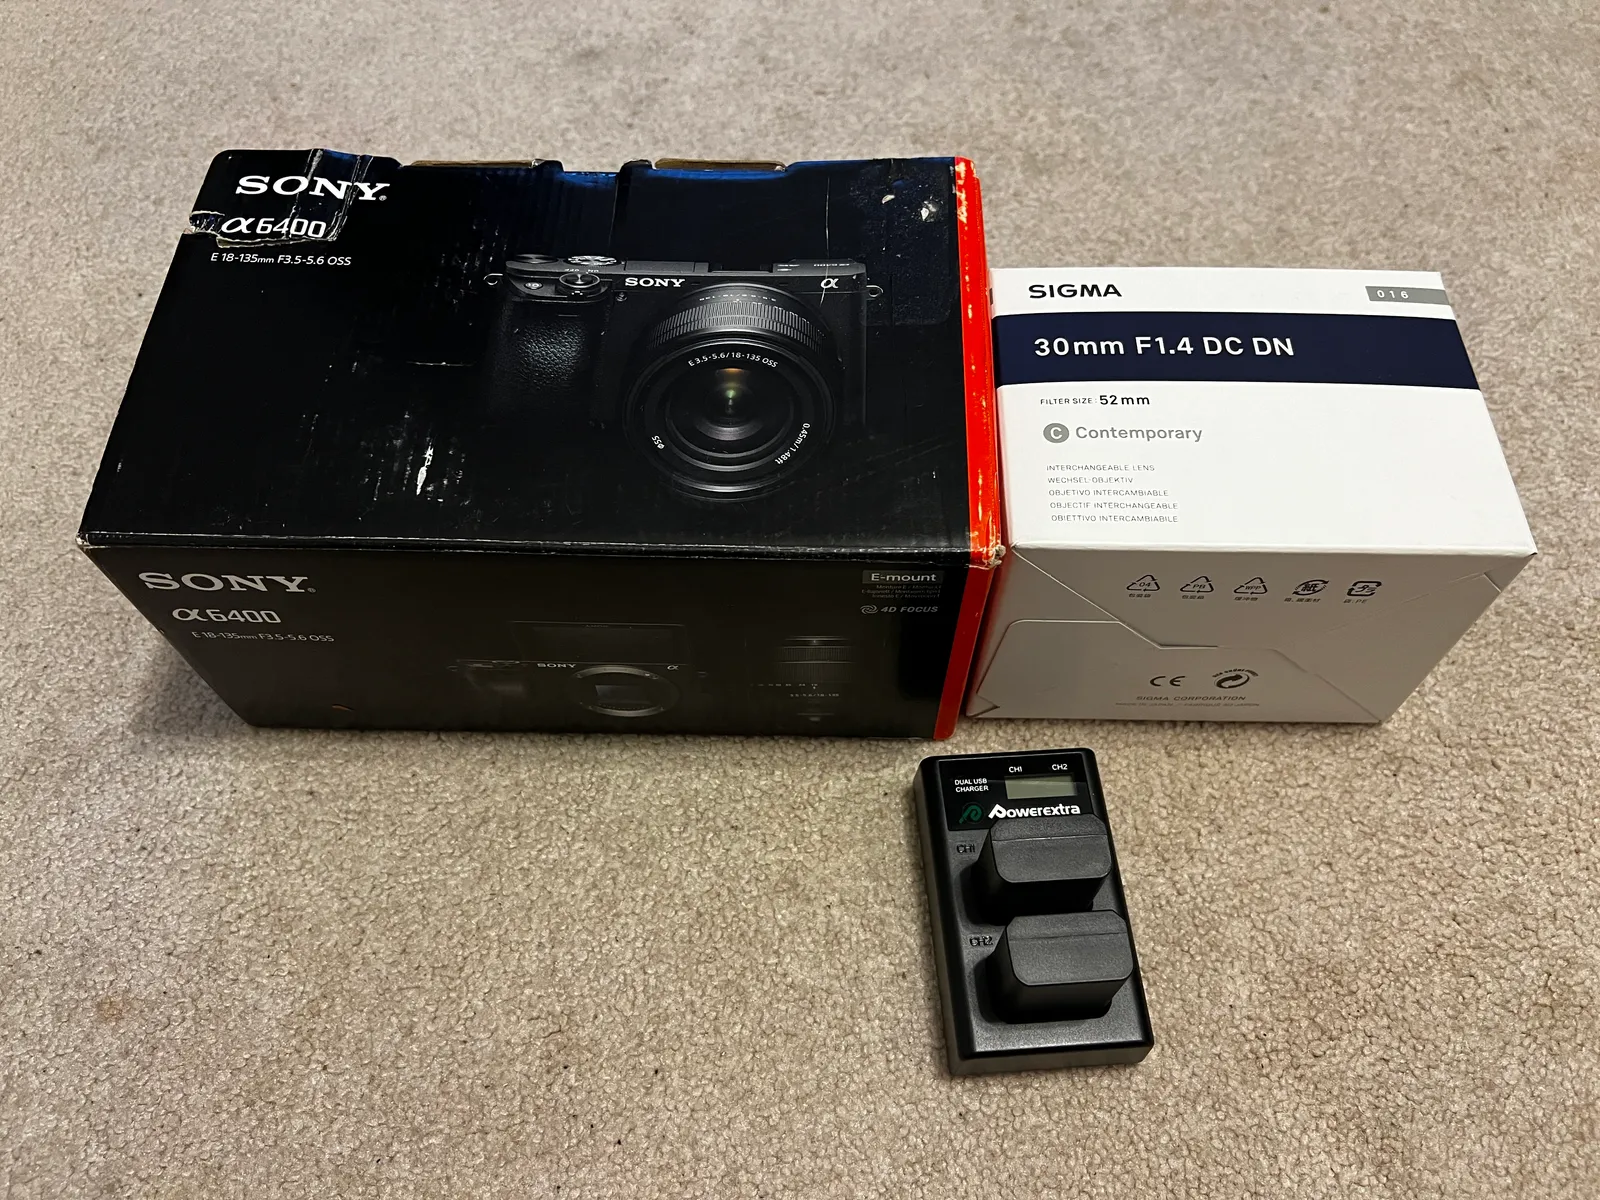 Sony A6400 with Sony 18-135mm and Sigma 30mm F1.4 Lens From 